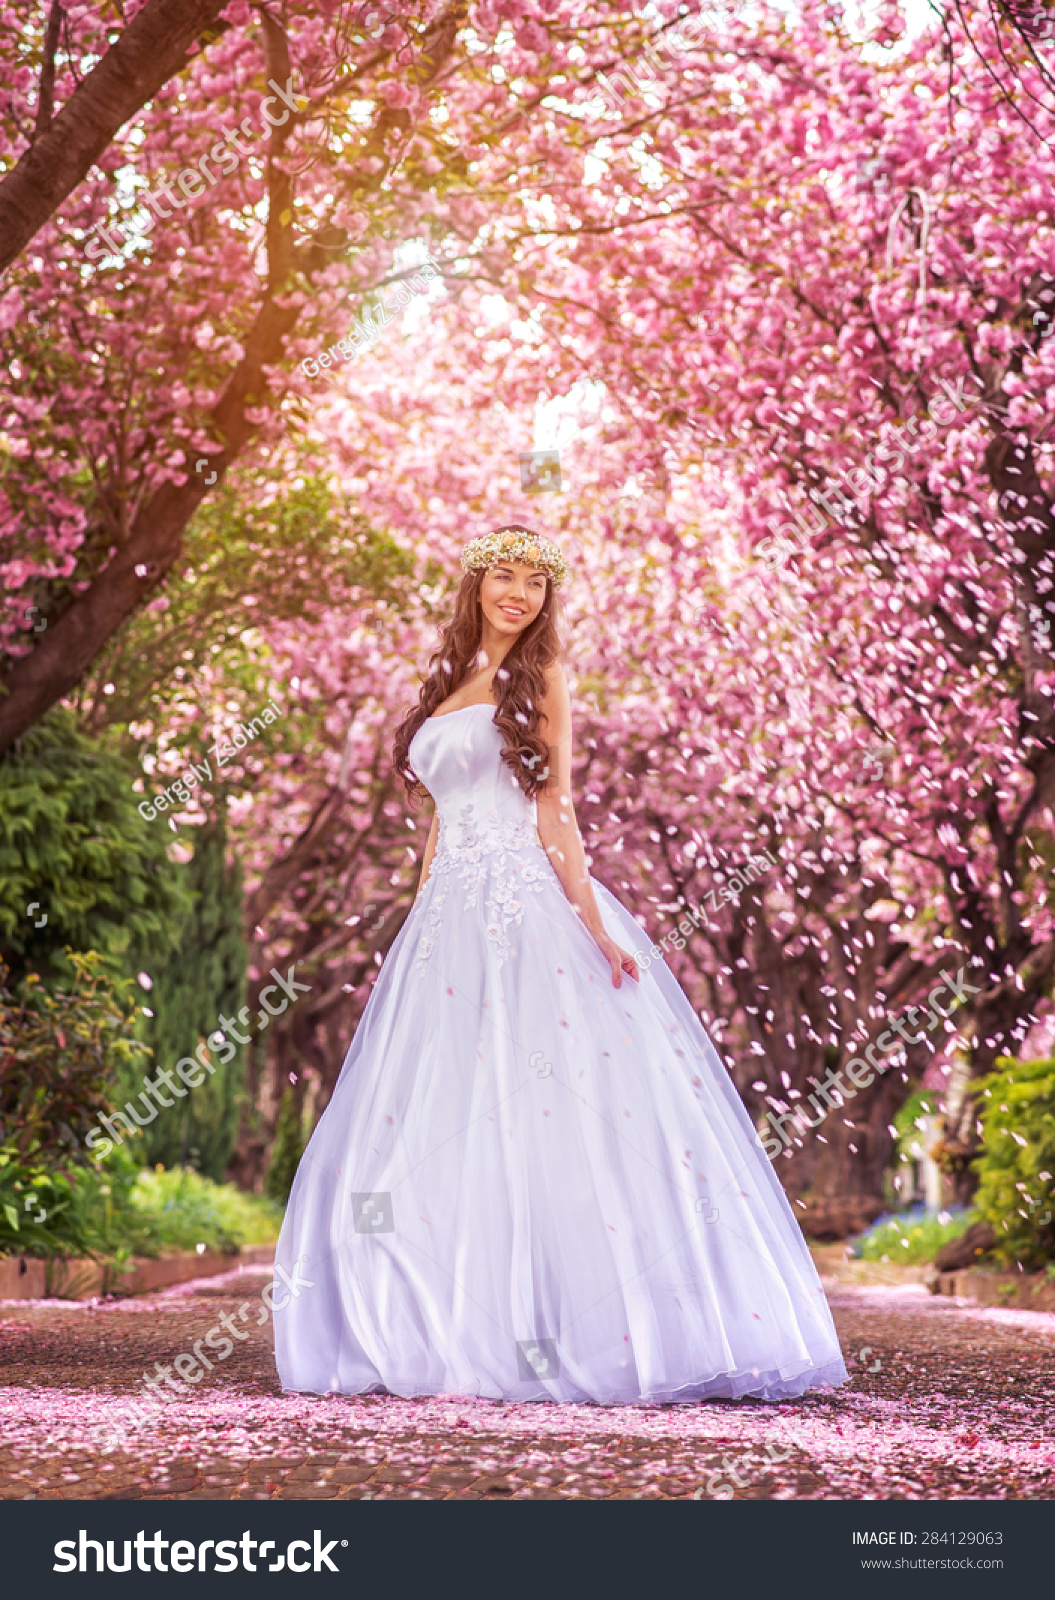 Beautiful bride in a white dress under the sakura tree and flower petals #284129063